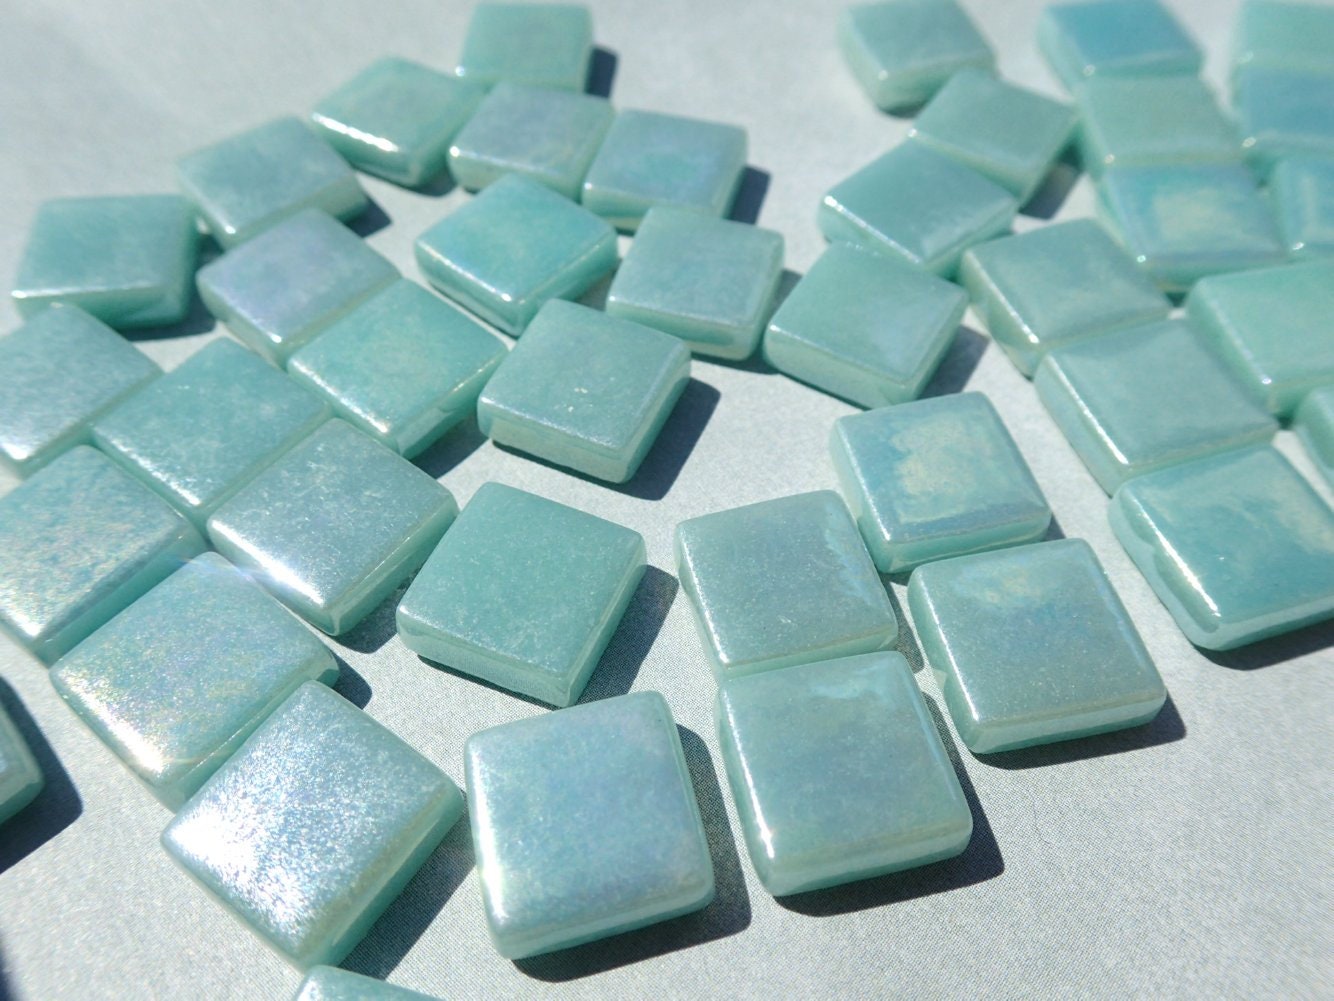 Light Teal Iridescent Glass Square Mosaic Tiles - 12mm - Opaque Glass Solid Color - 50g - Approx 35 Tiles